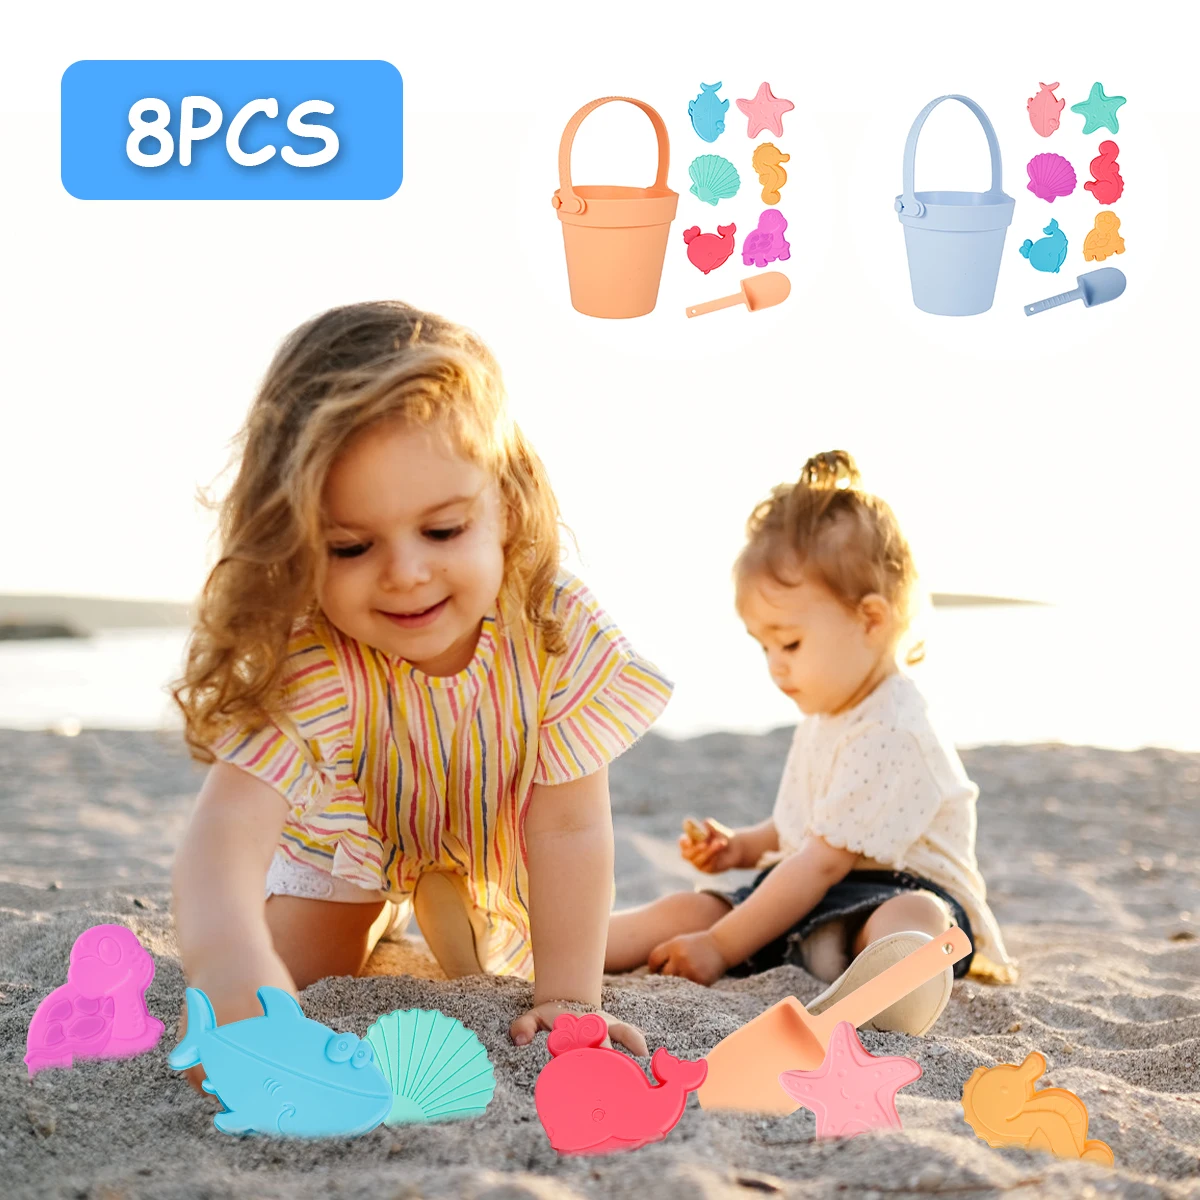 

8PC Children Summer Toys with Cute Animal Model Ins Seaside Beach Game Toy for Send Children Beach Play Sand Water Play Tools